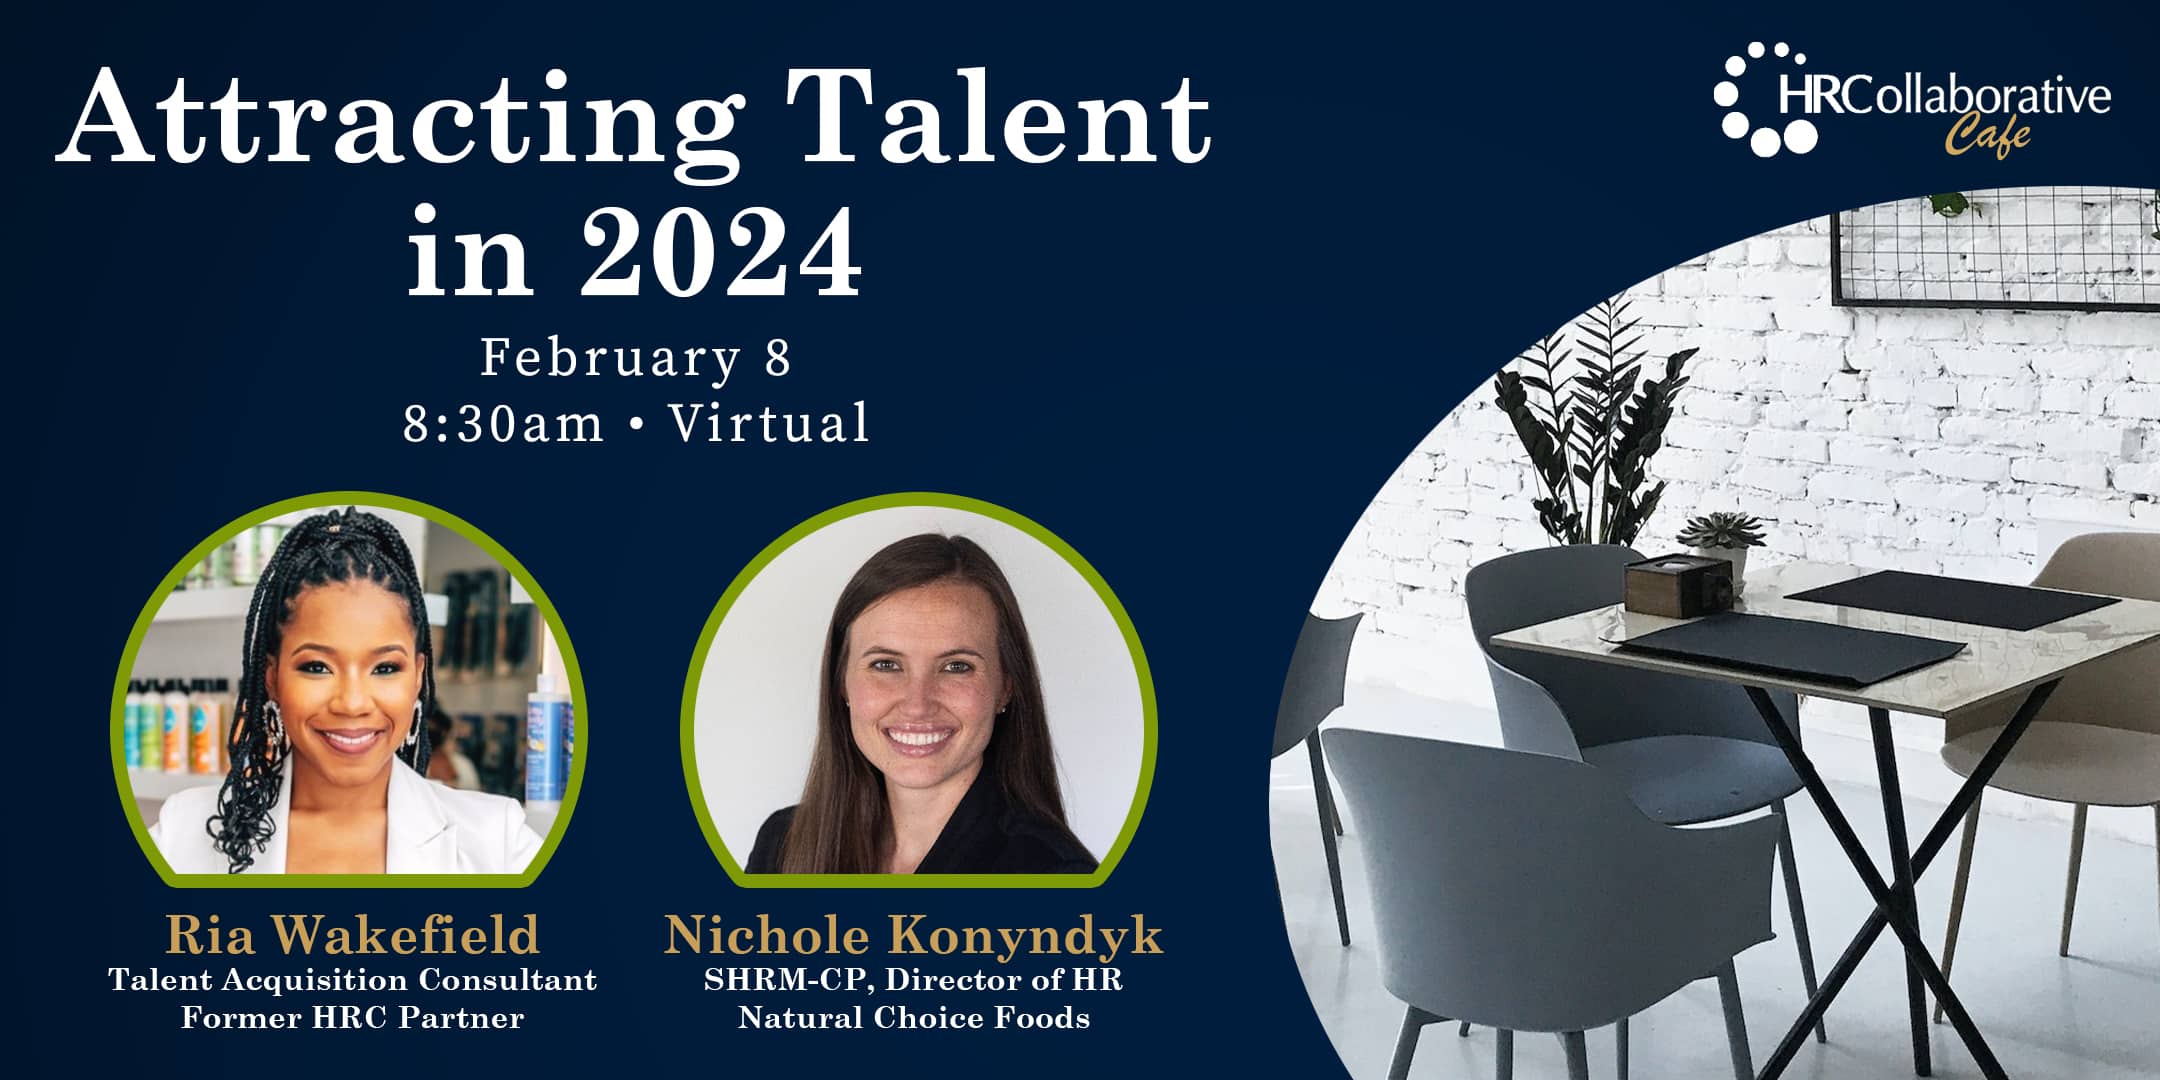 Collaborative Cafe - Attracting Talent in 2024